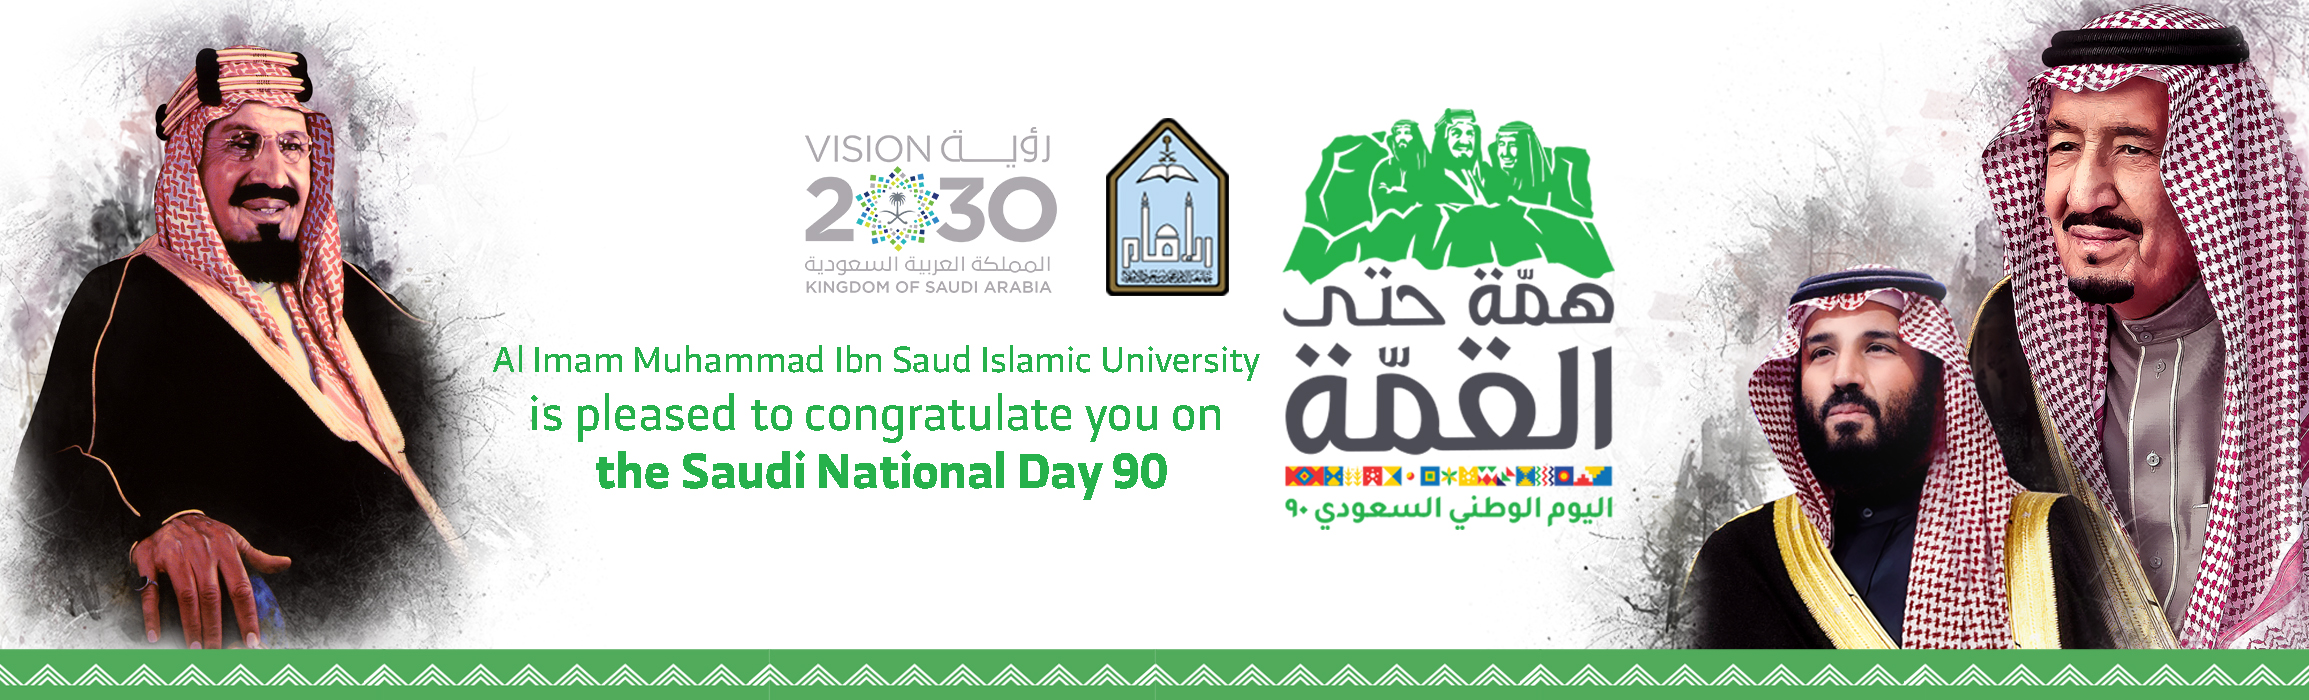 National Day 90